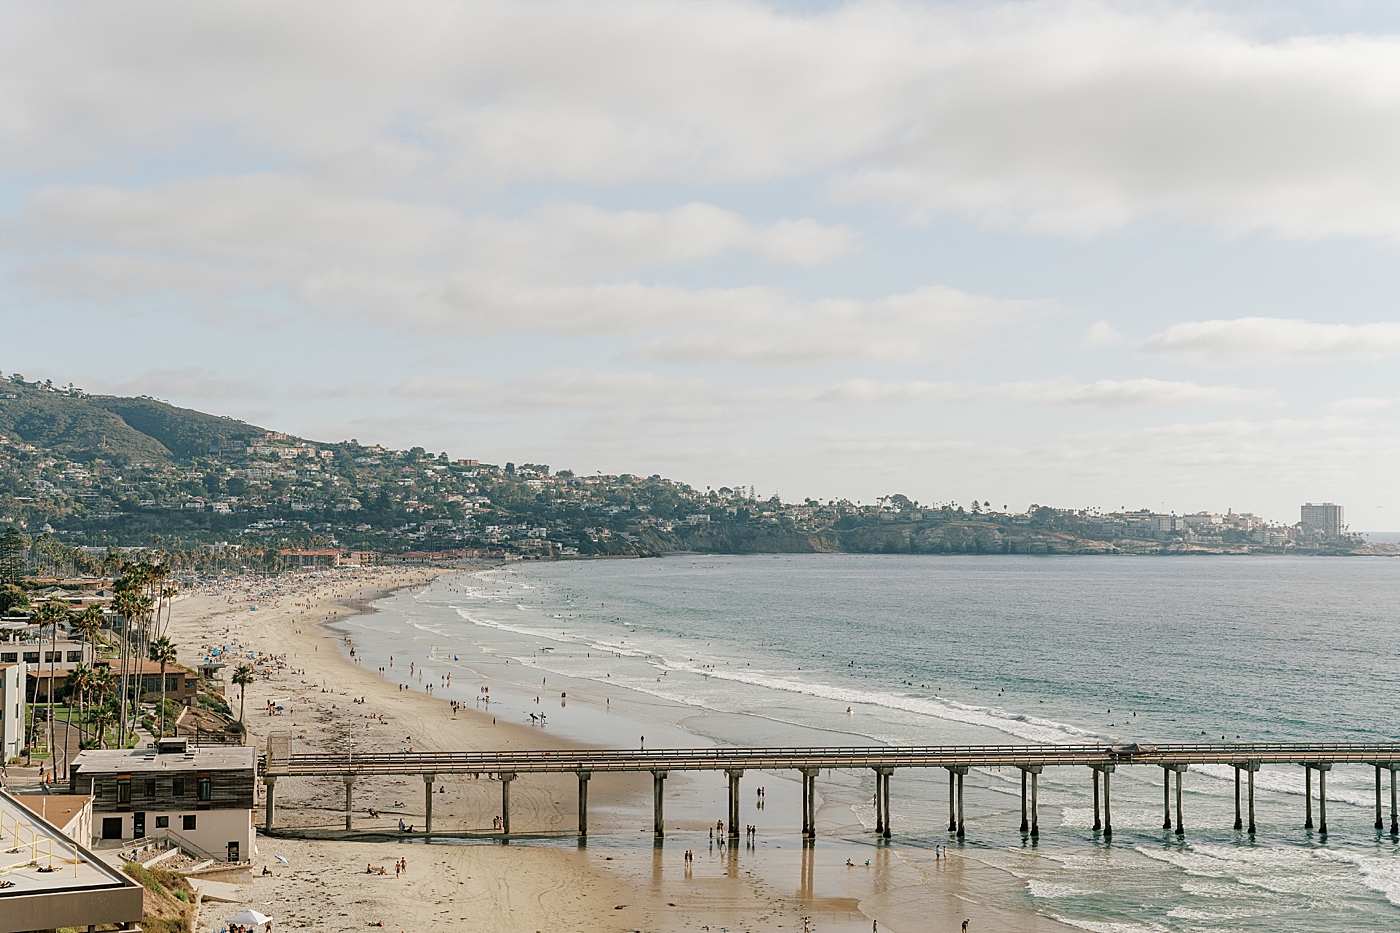 Location detail wide shot of beach pier and tropical landscape | Image by San Diego Wedding Photographer Hope Helmuth